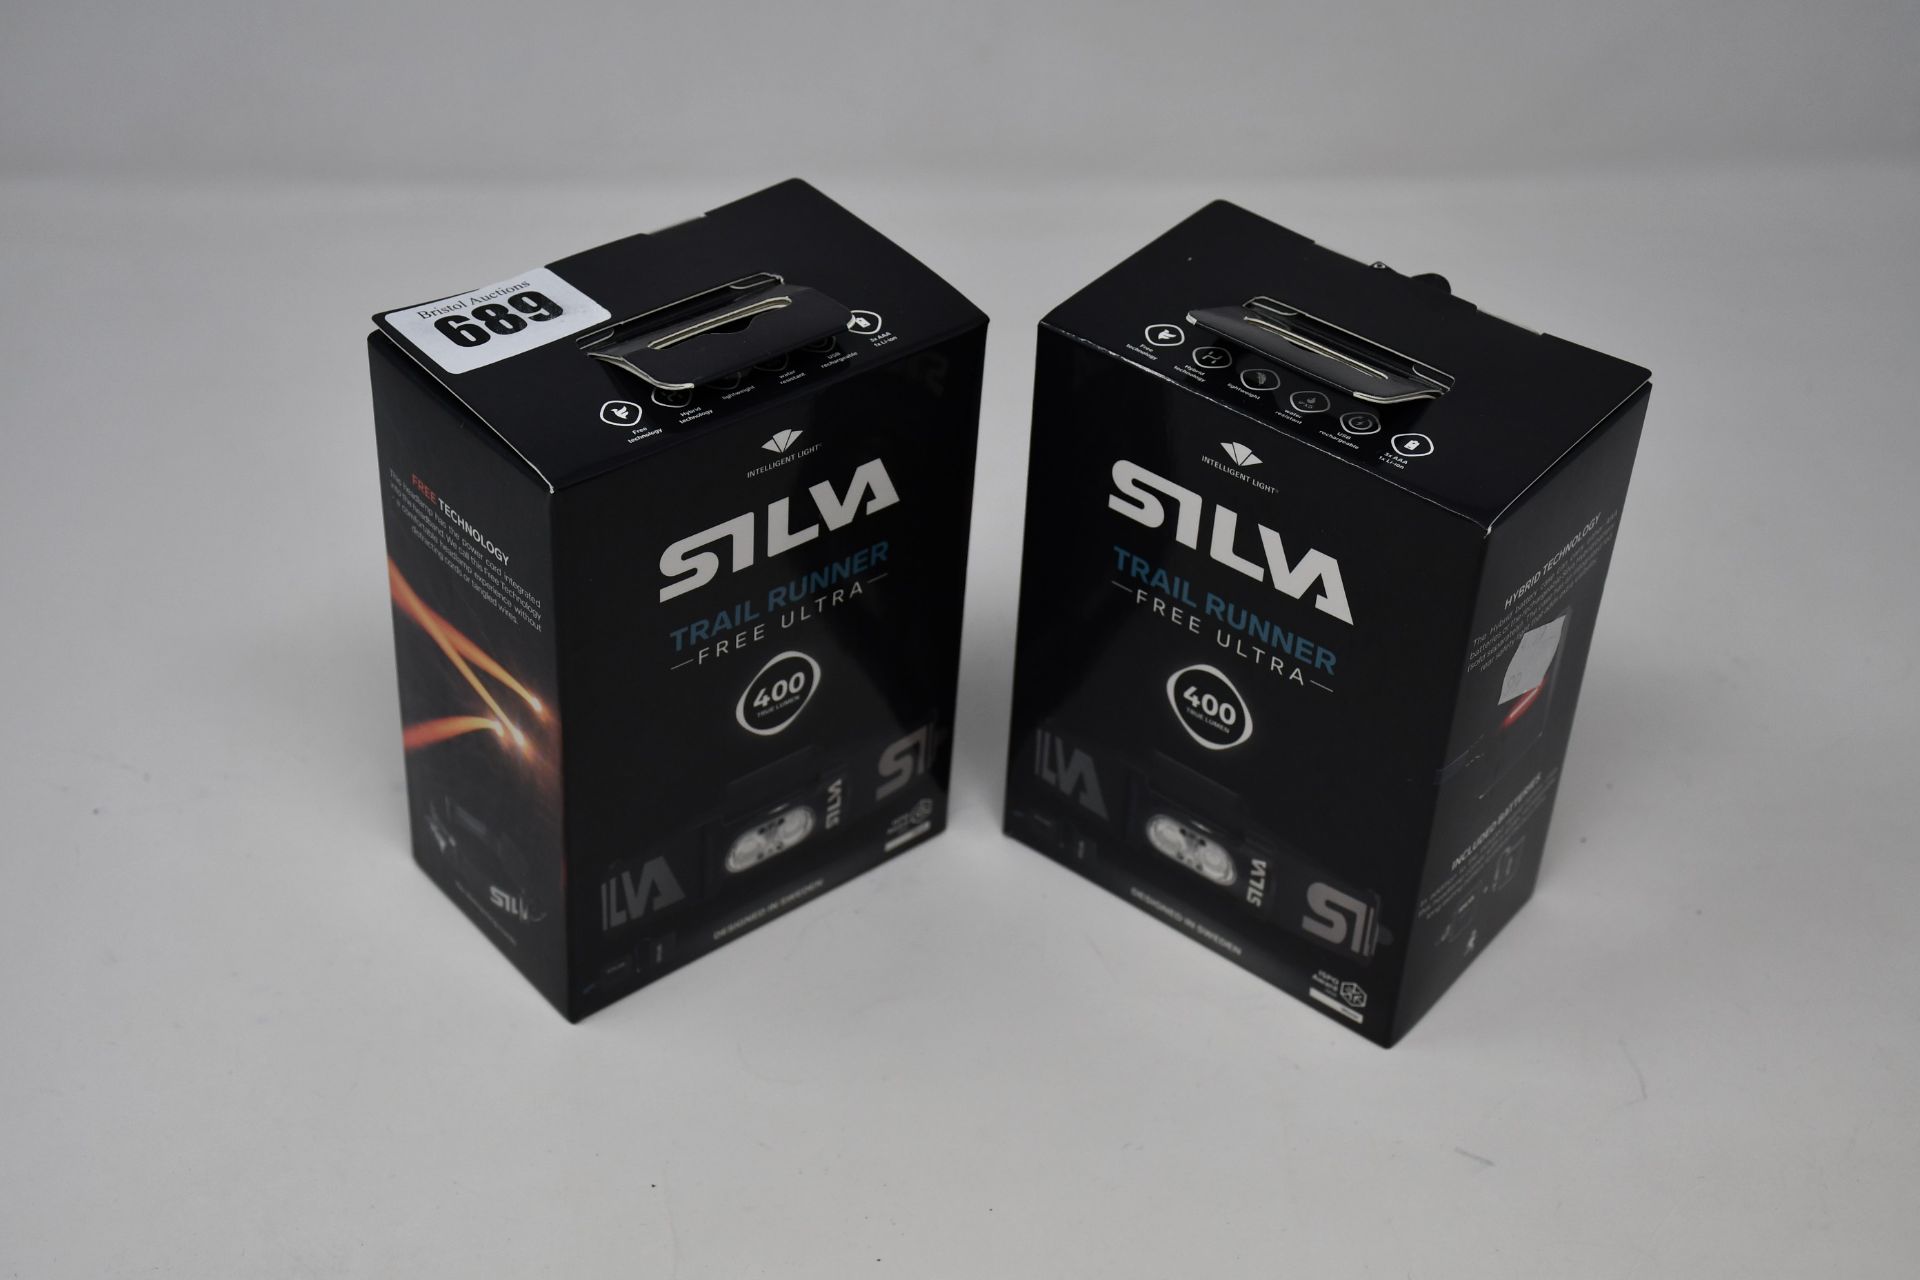 Two boxed as new Silva Trail Runner Free Ultra 400 Lumen head torches.